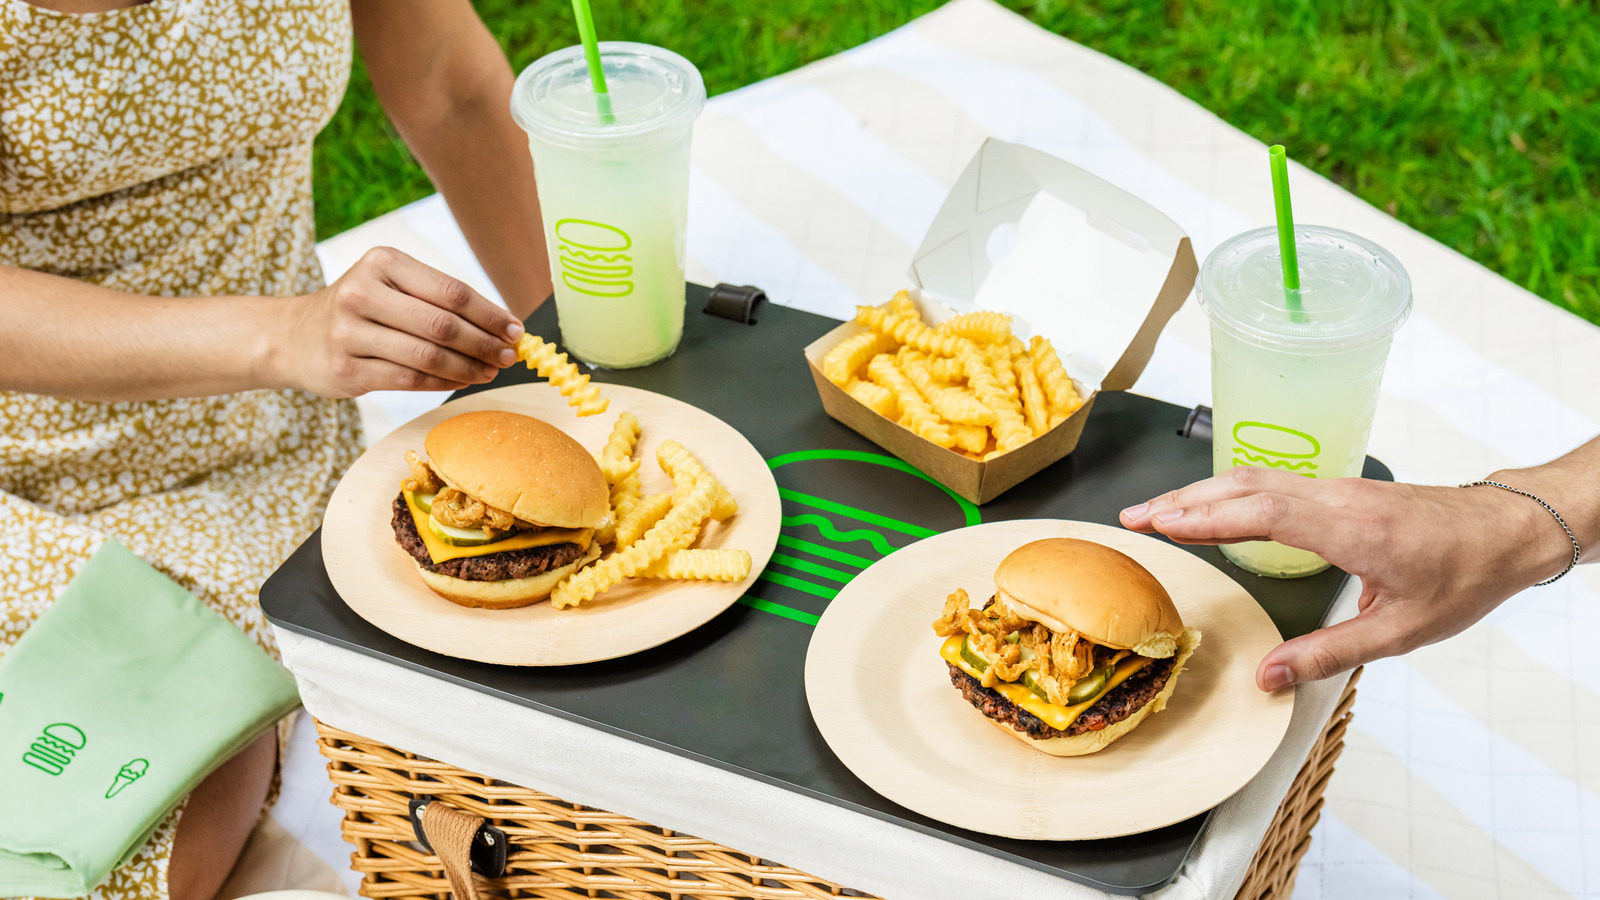 https://www.thedailymeal.com/img/gallery/shake-shack-is-celebrating-its-veggie-burger-with-a-new-picnic-bundle/l-intro-1690306683.jpg